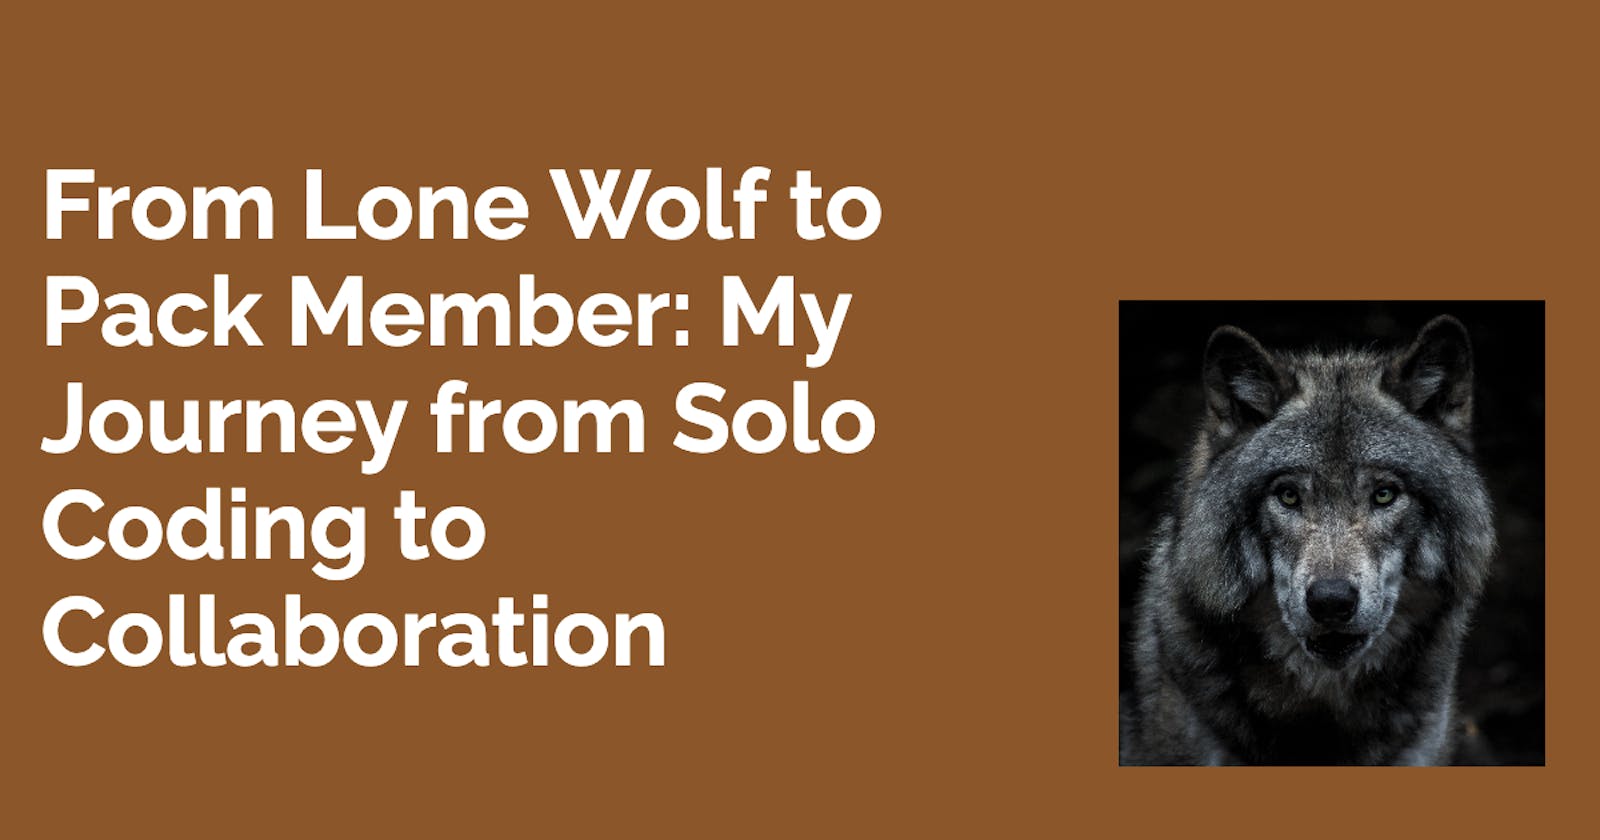 From Lone Wolf to Pack Member: My Journey from Solo Coding to Collaboration